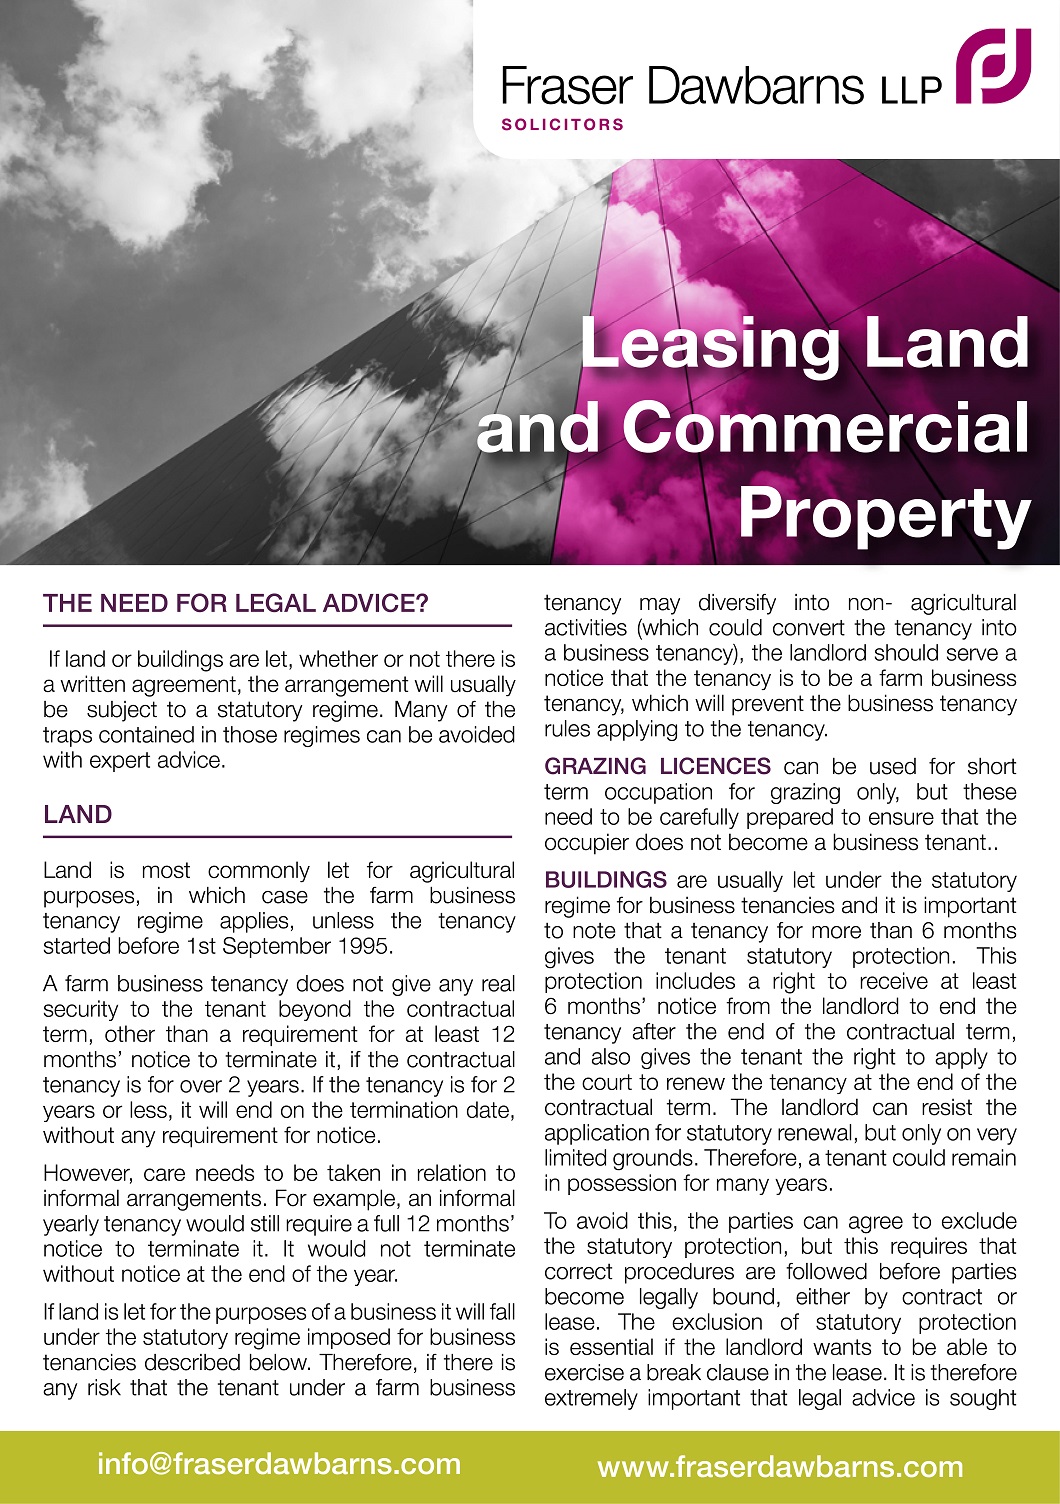 leasing_land_commercial_property